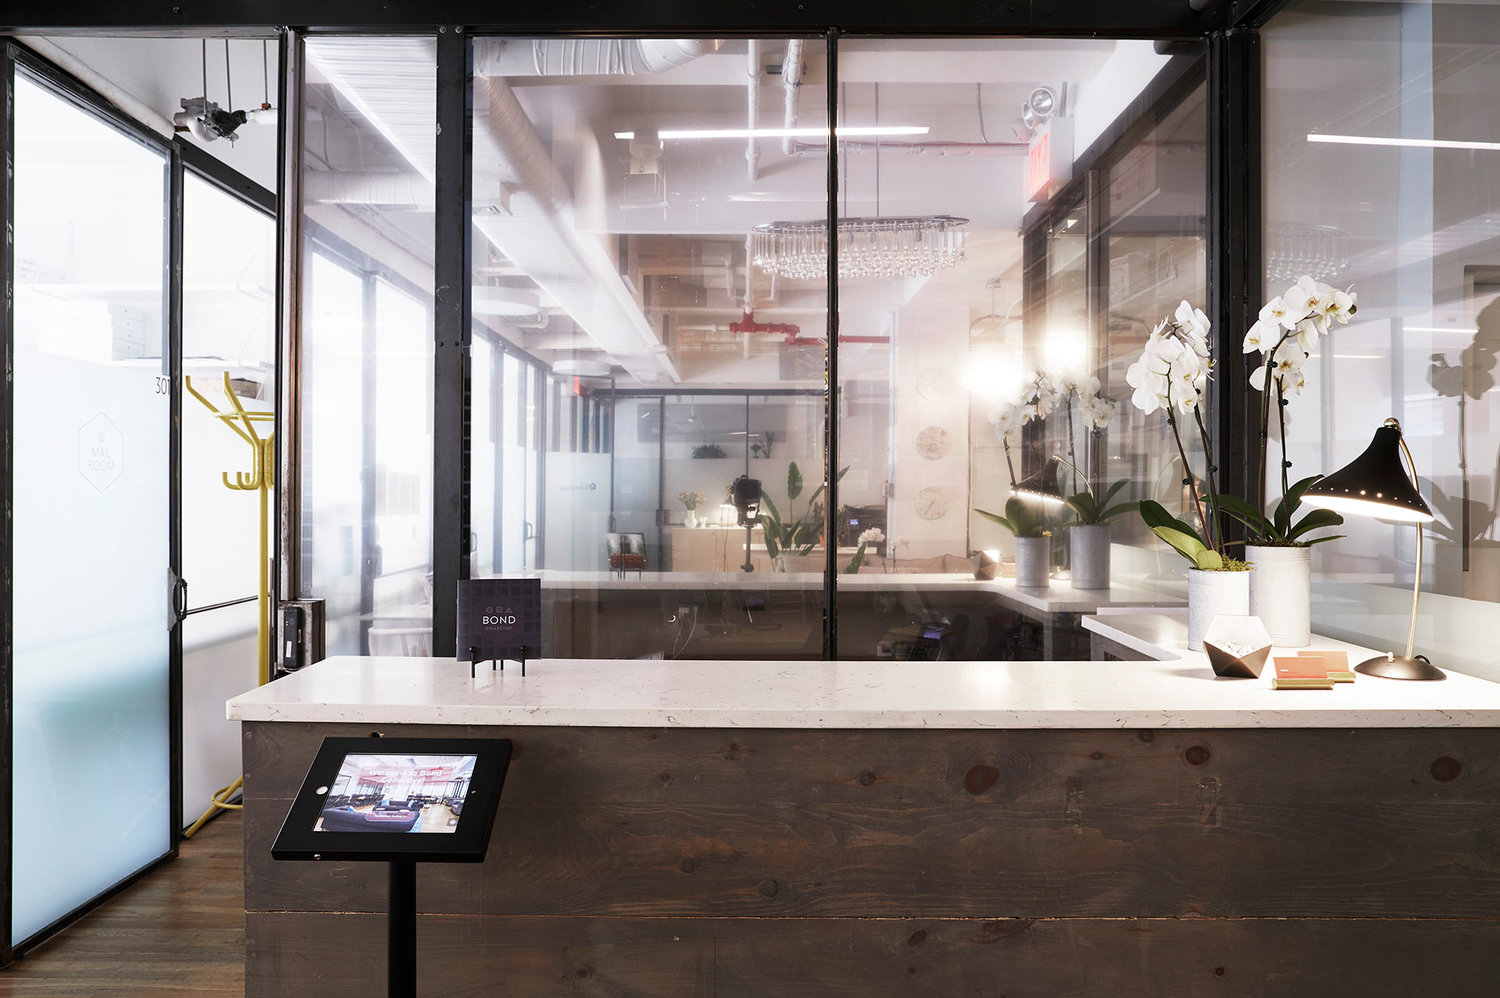 entry area of bond collective shared coworking and open office plan spaces